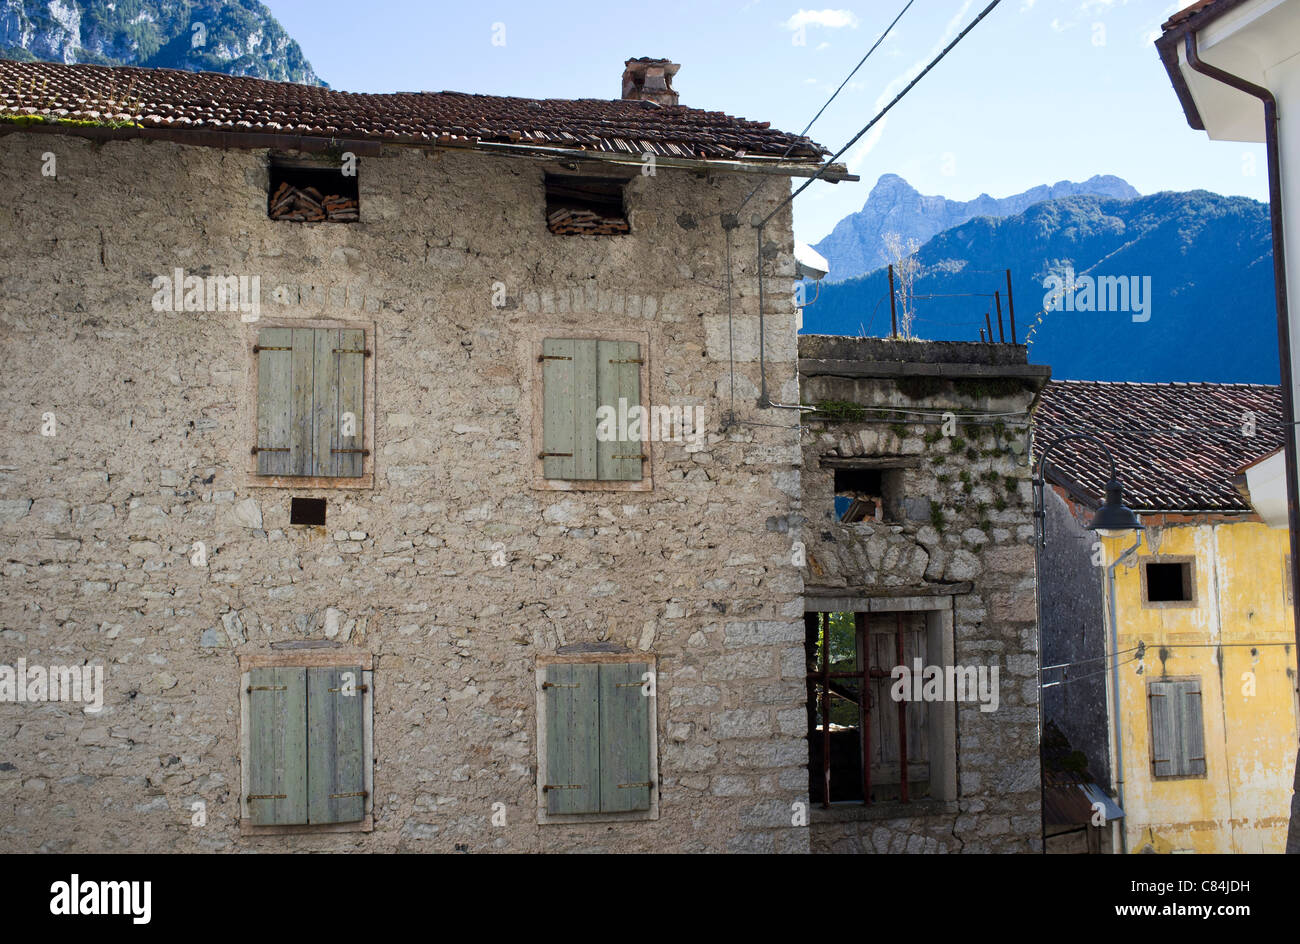 A genaral view of the  village of Erto near  the Vajont dam, Veneto Italy now nearly abandoned on the day of the 48th anniversar Stock Photo